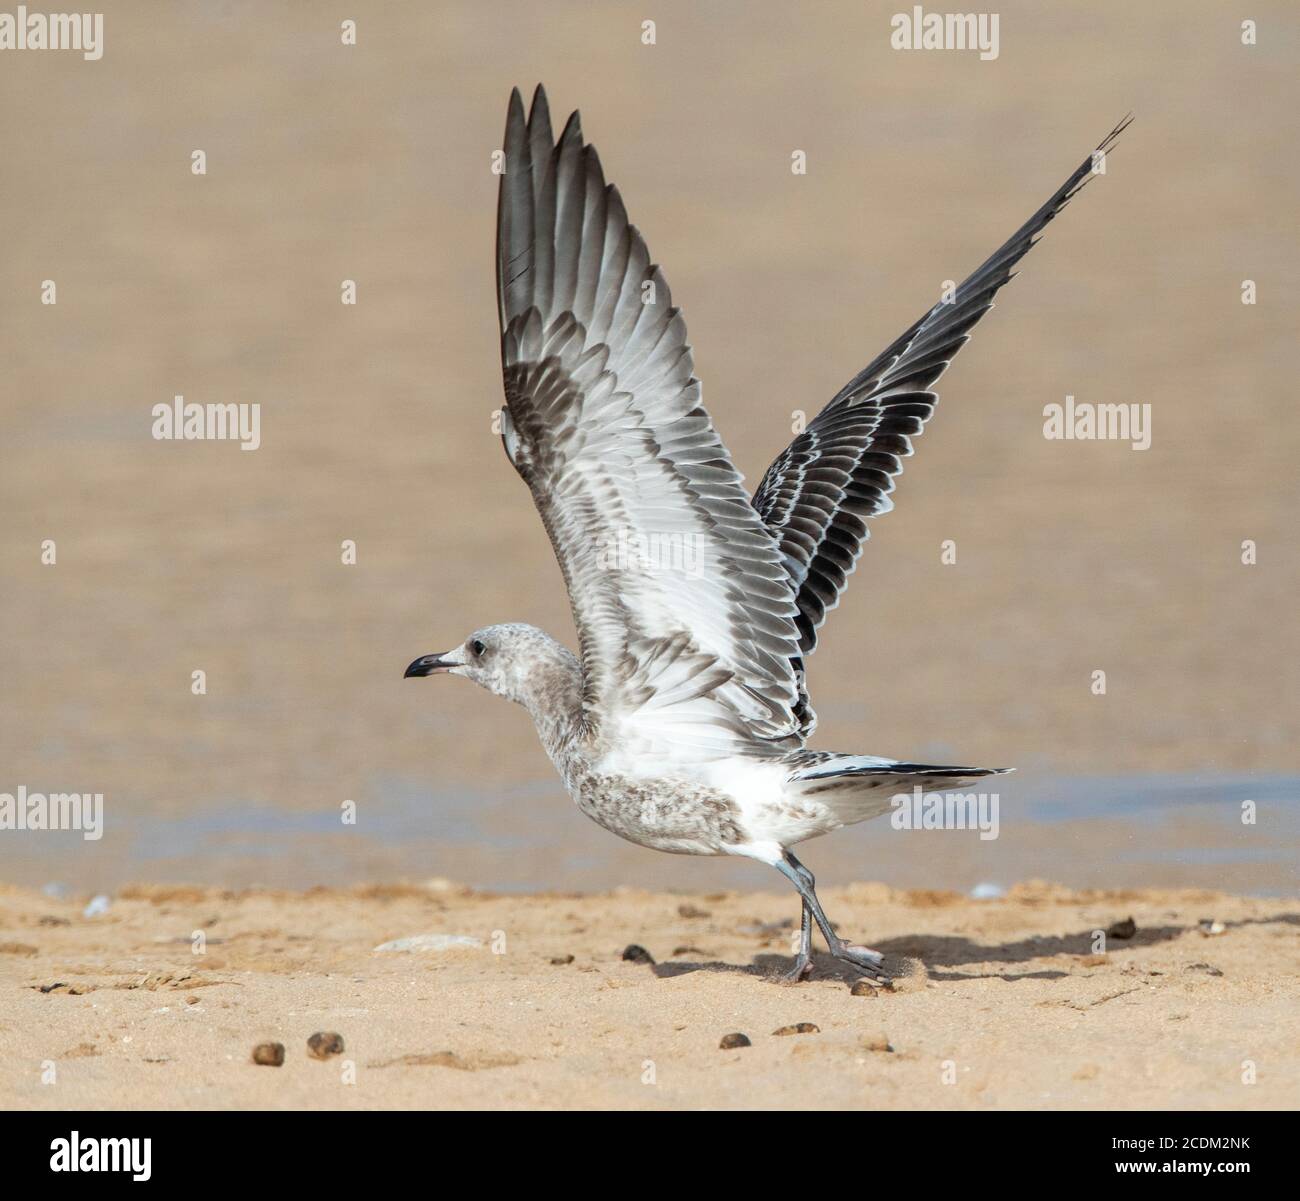 Audouin's gull (Larus audouinii, Ichthyaetus audouinii), immature taking off from the beach, side view, Morocco Stock Photo